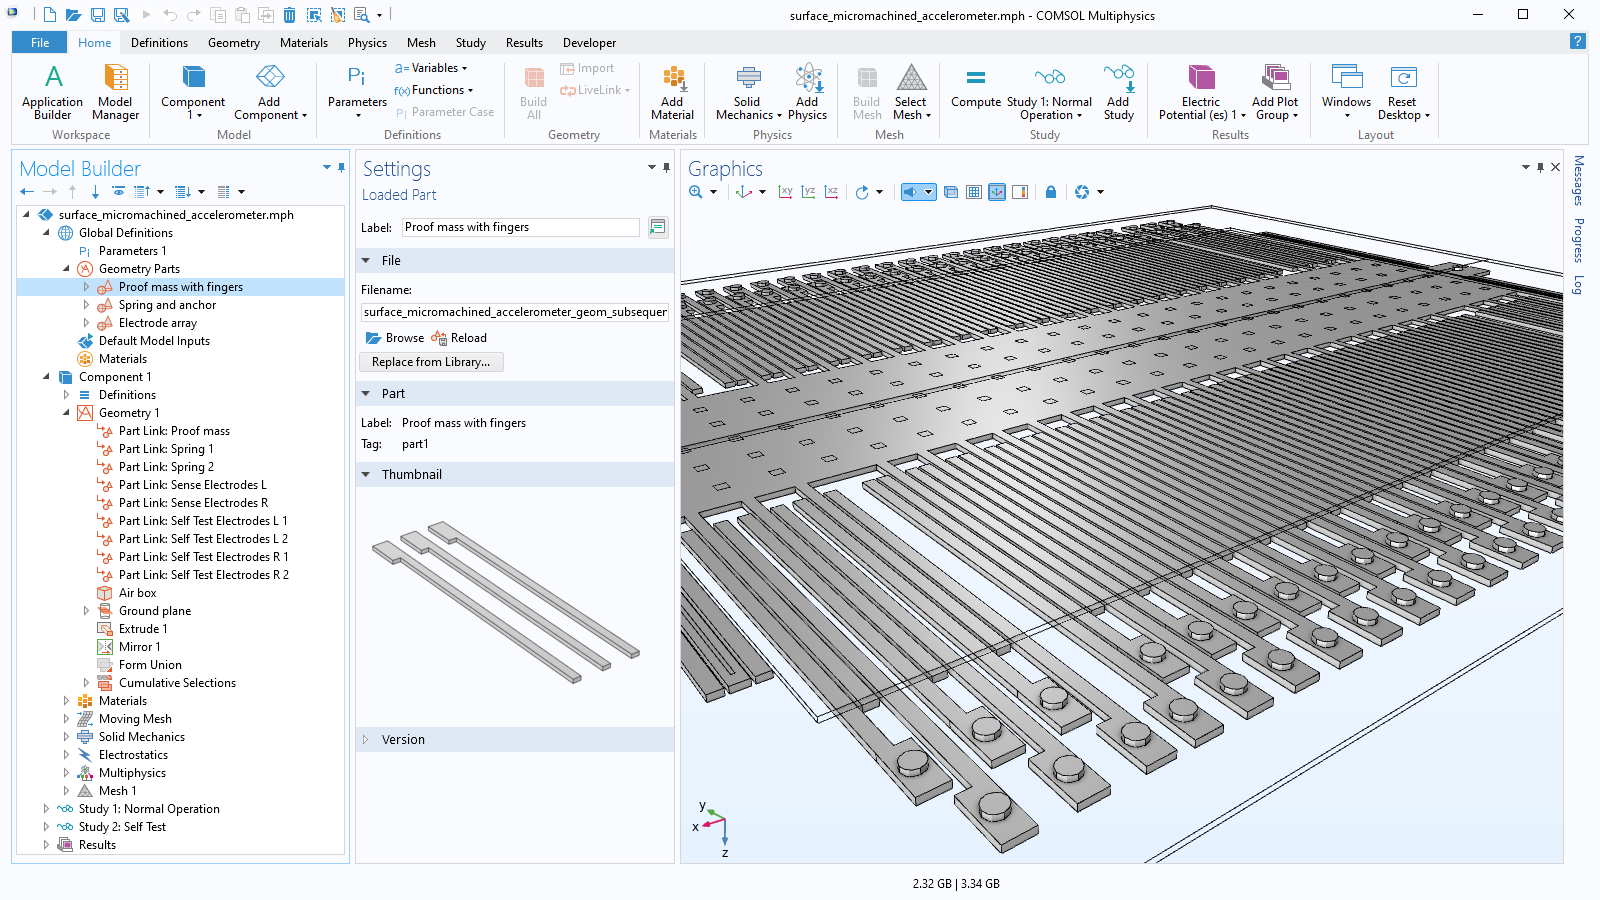 The COMSOL Multiphysics UI showing the Model Builder with the Proof mass with fingers node highlighted, the corresponding Settings window, and an accelerometer model in the Graphics window.